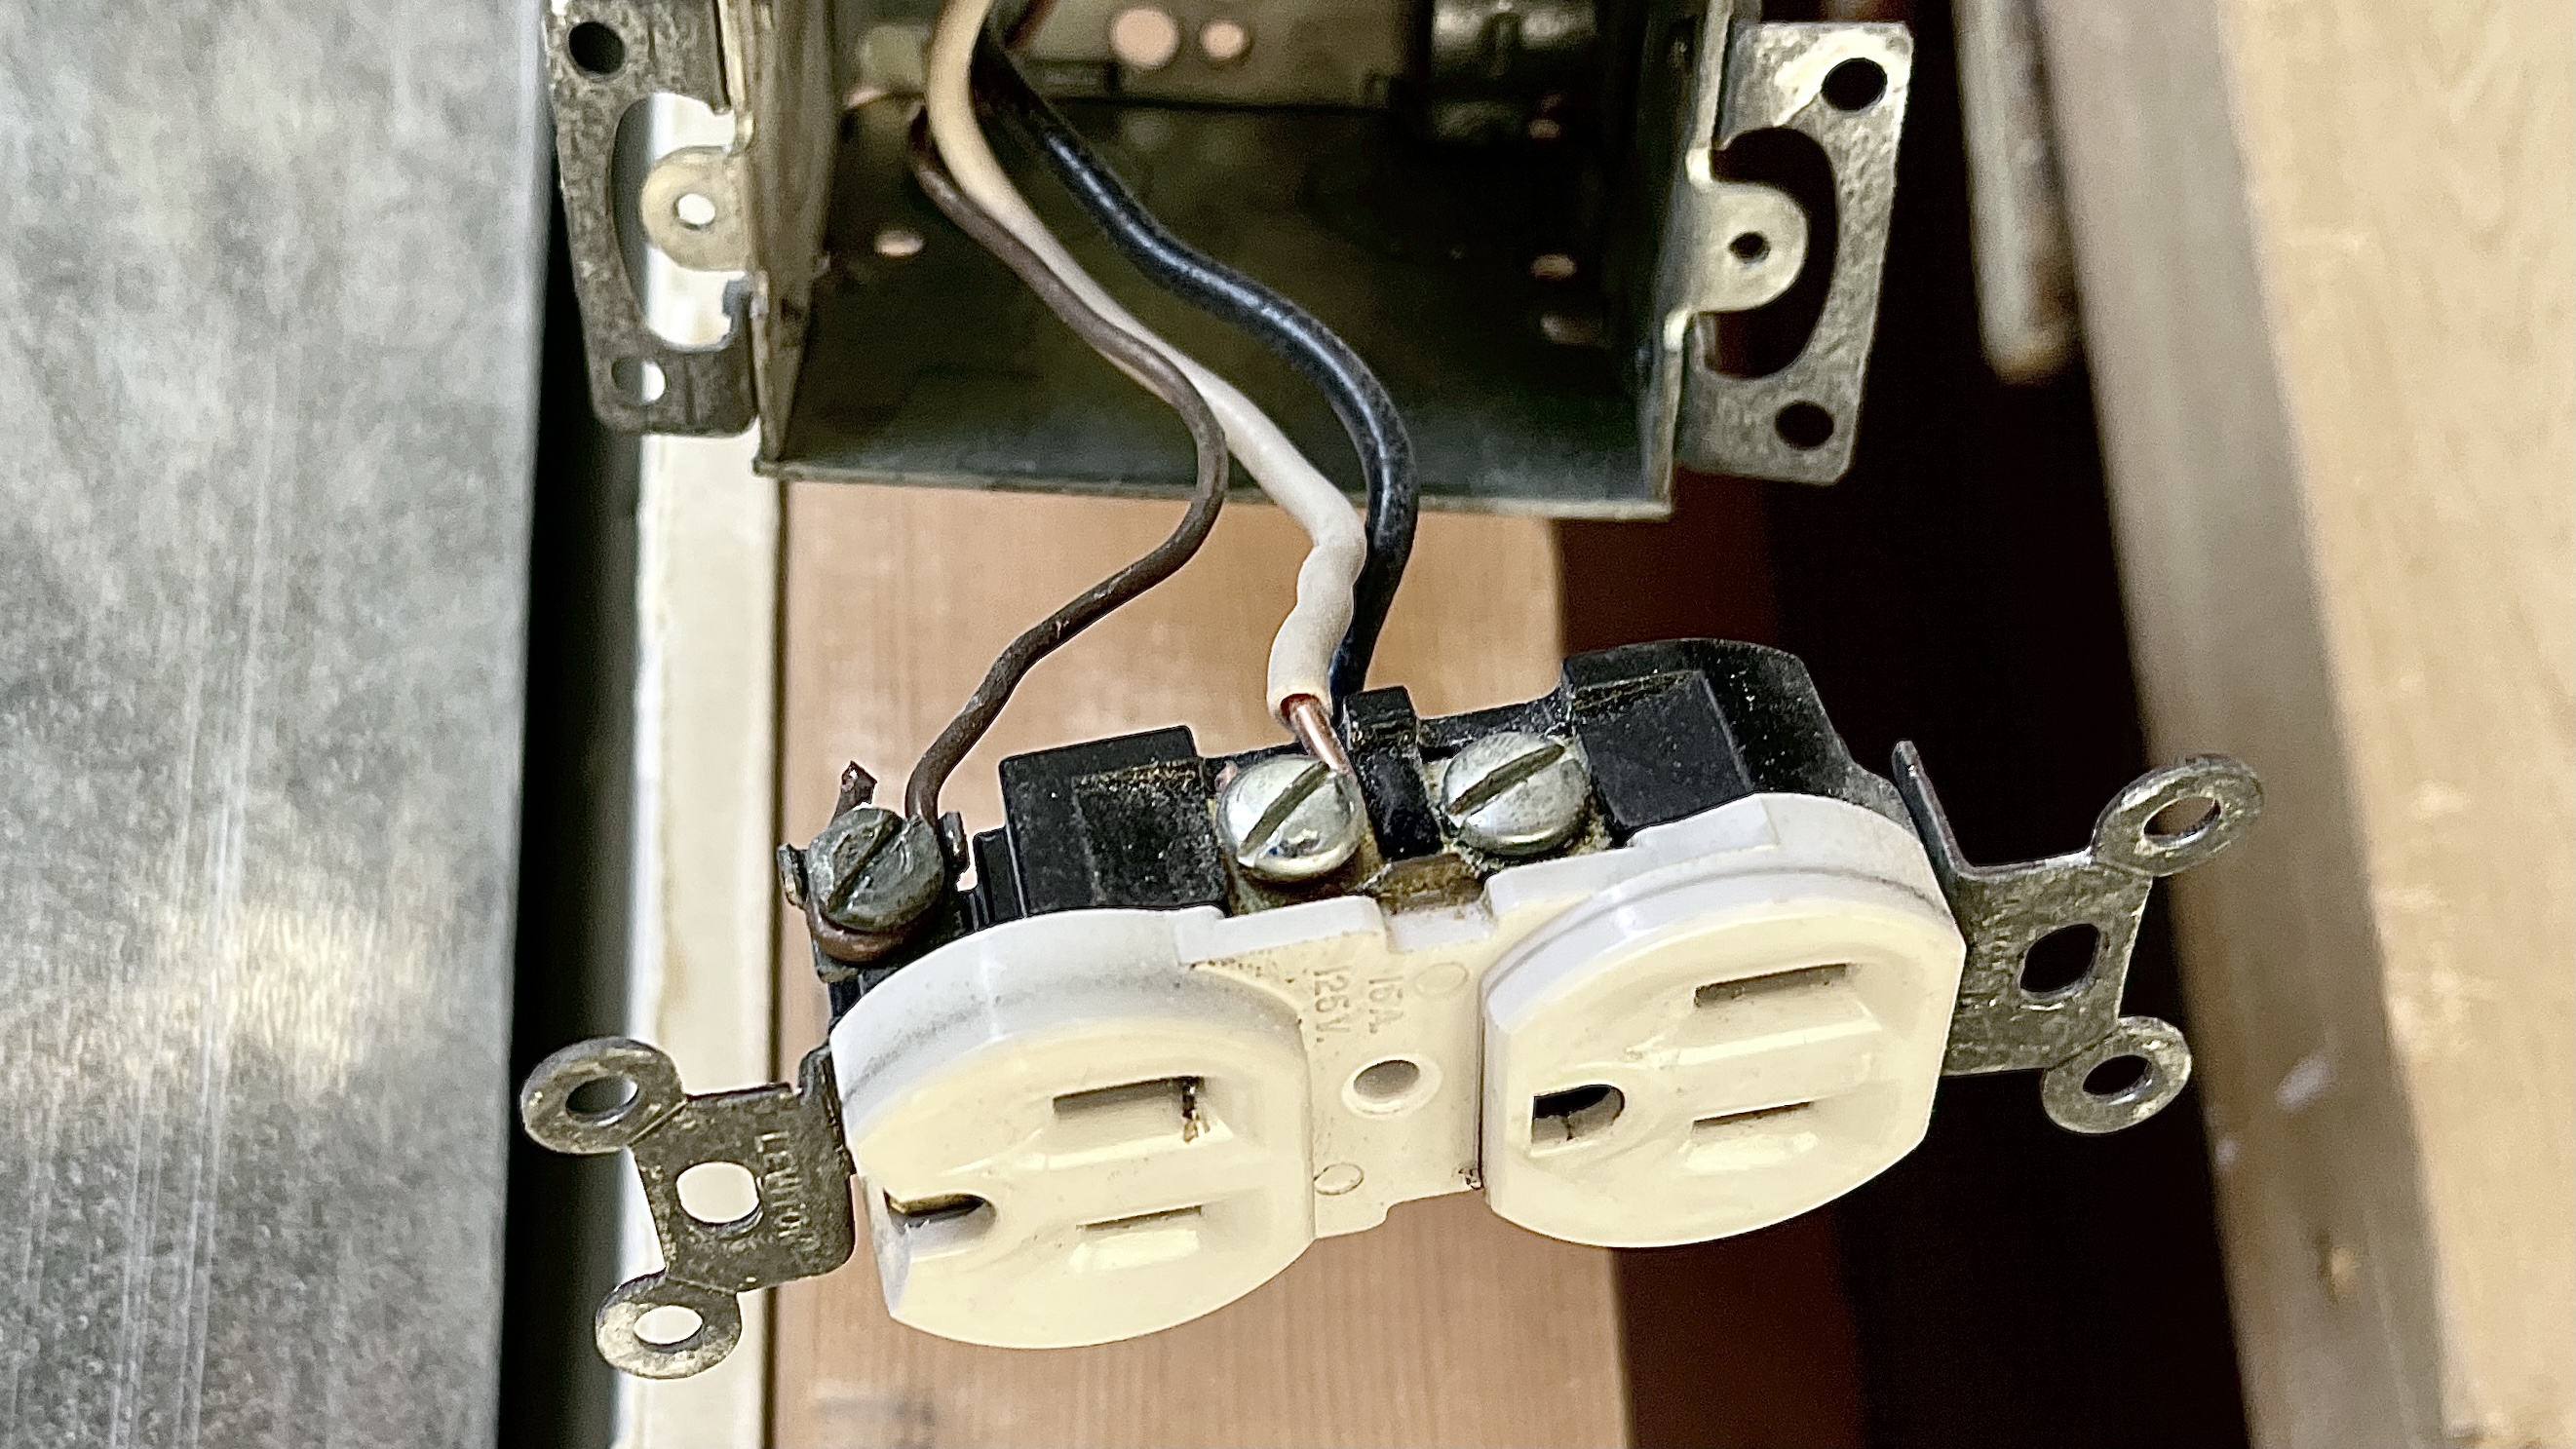 Diy Smart Home What S A Neutral Wire, How To Test Old House Wiring